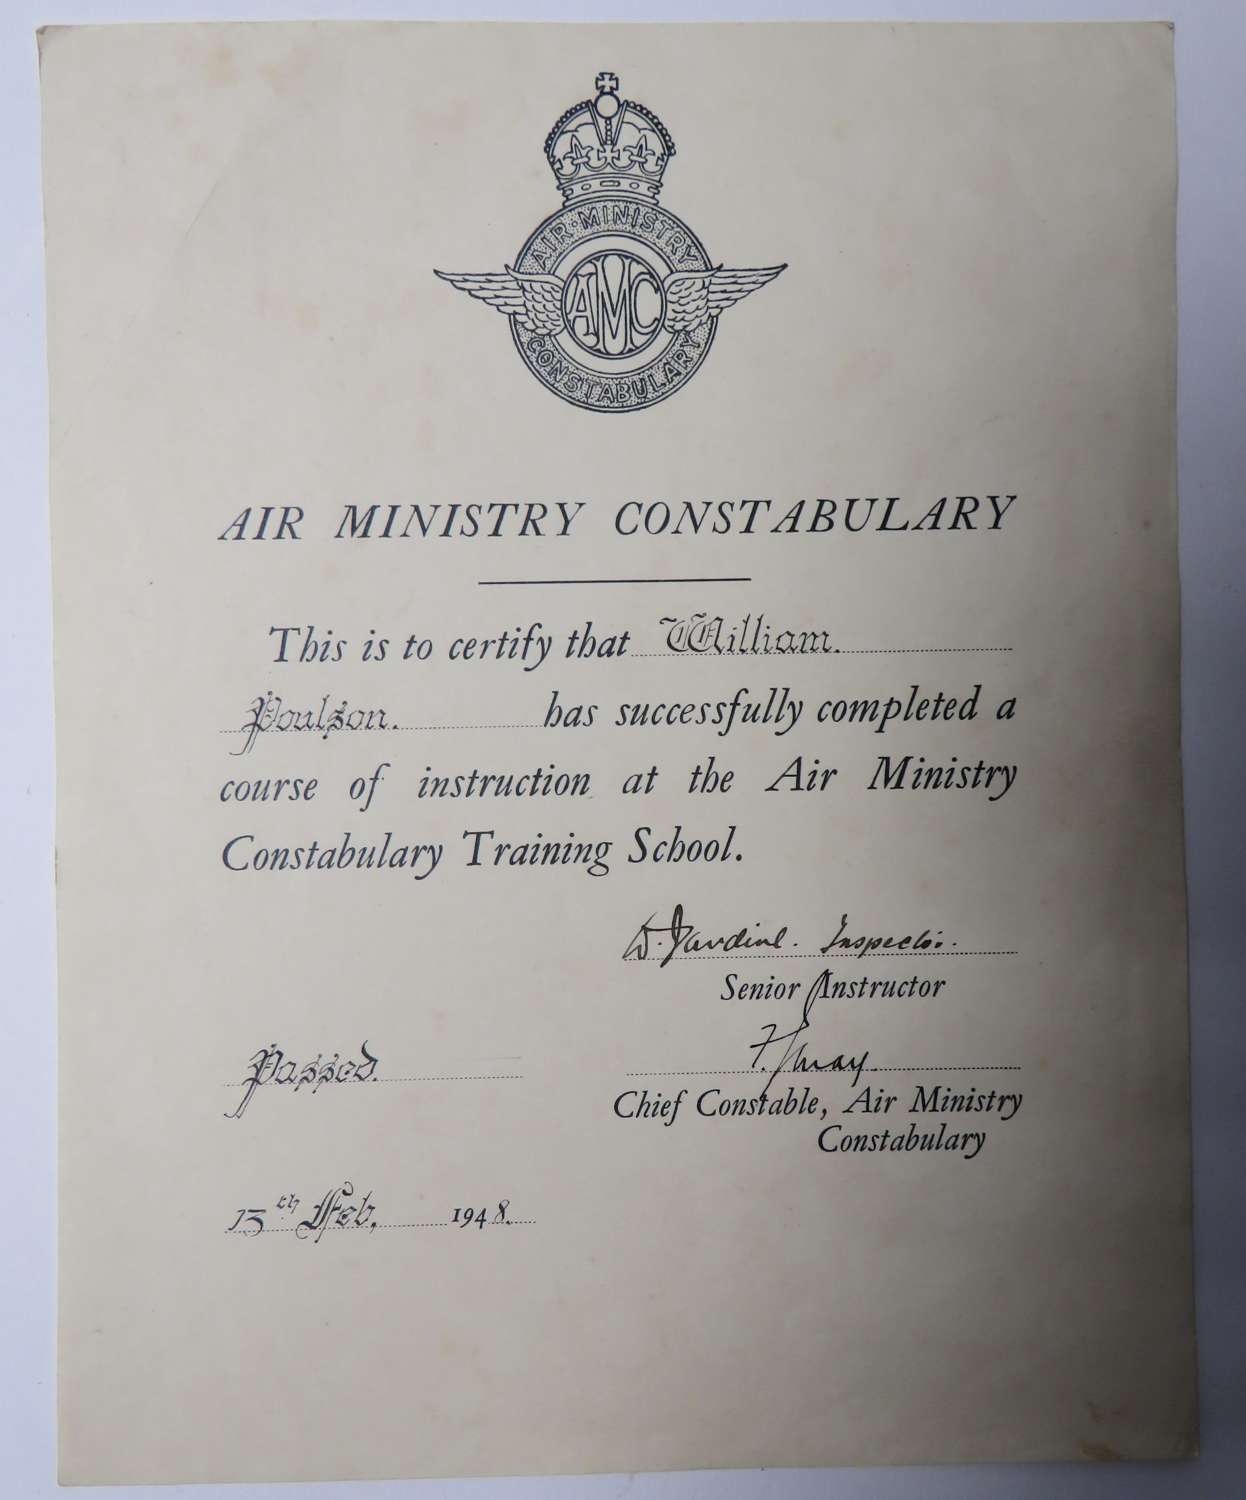 Air Ministry Constabulary Certificate